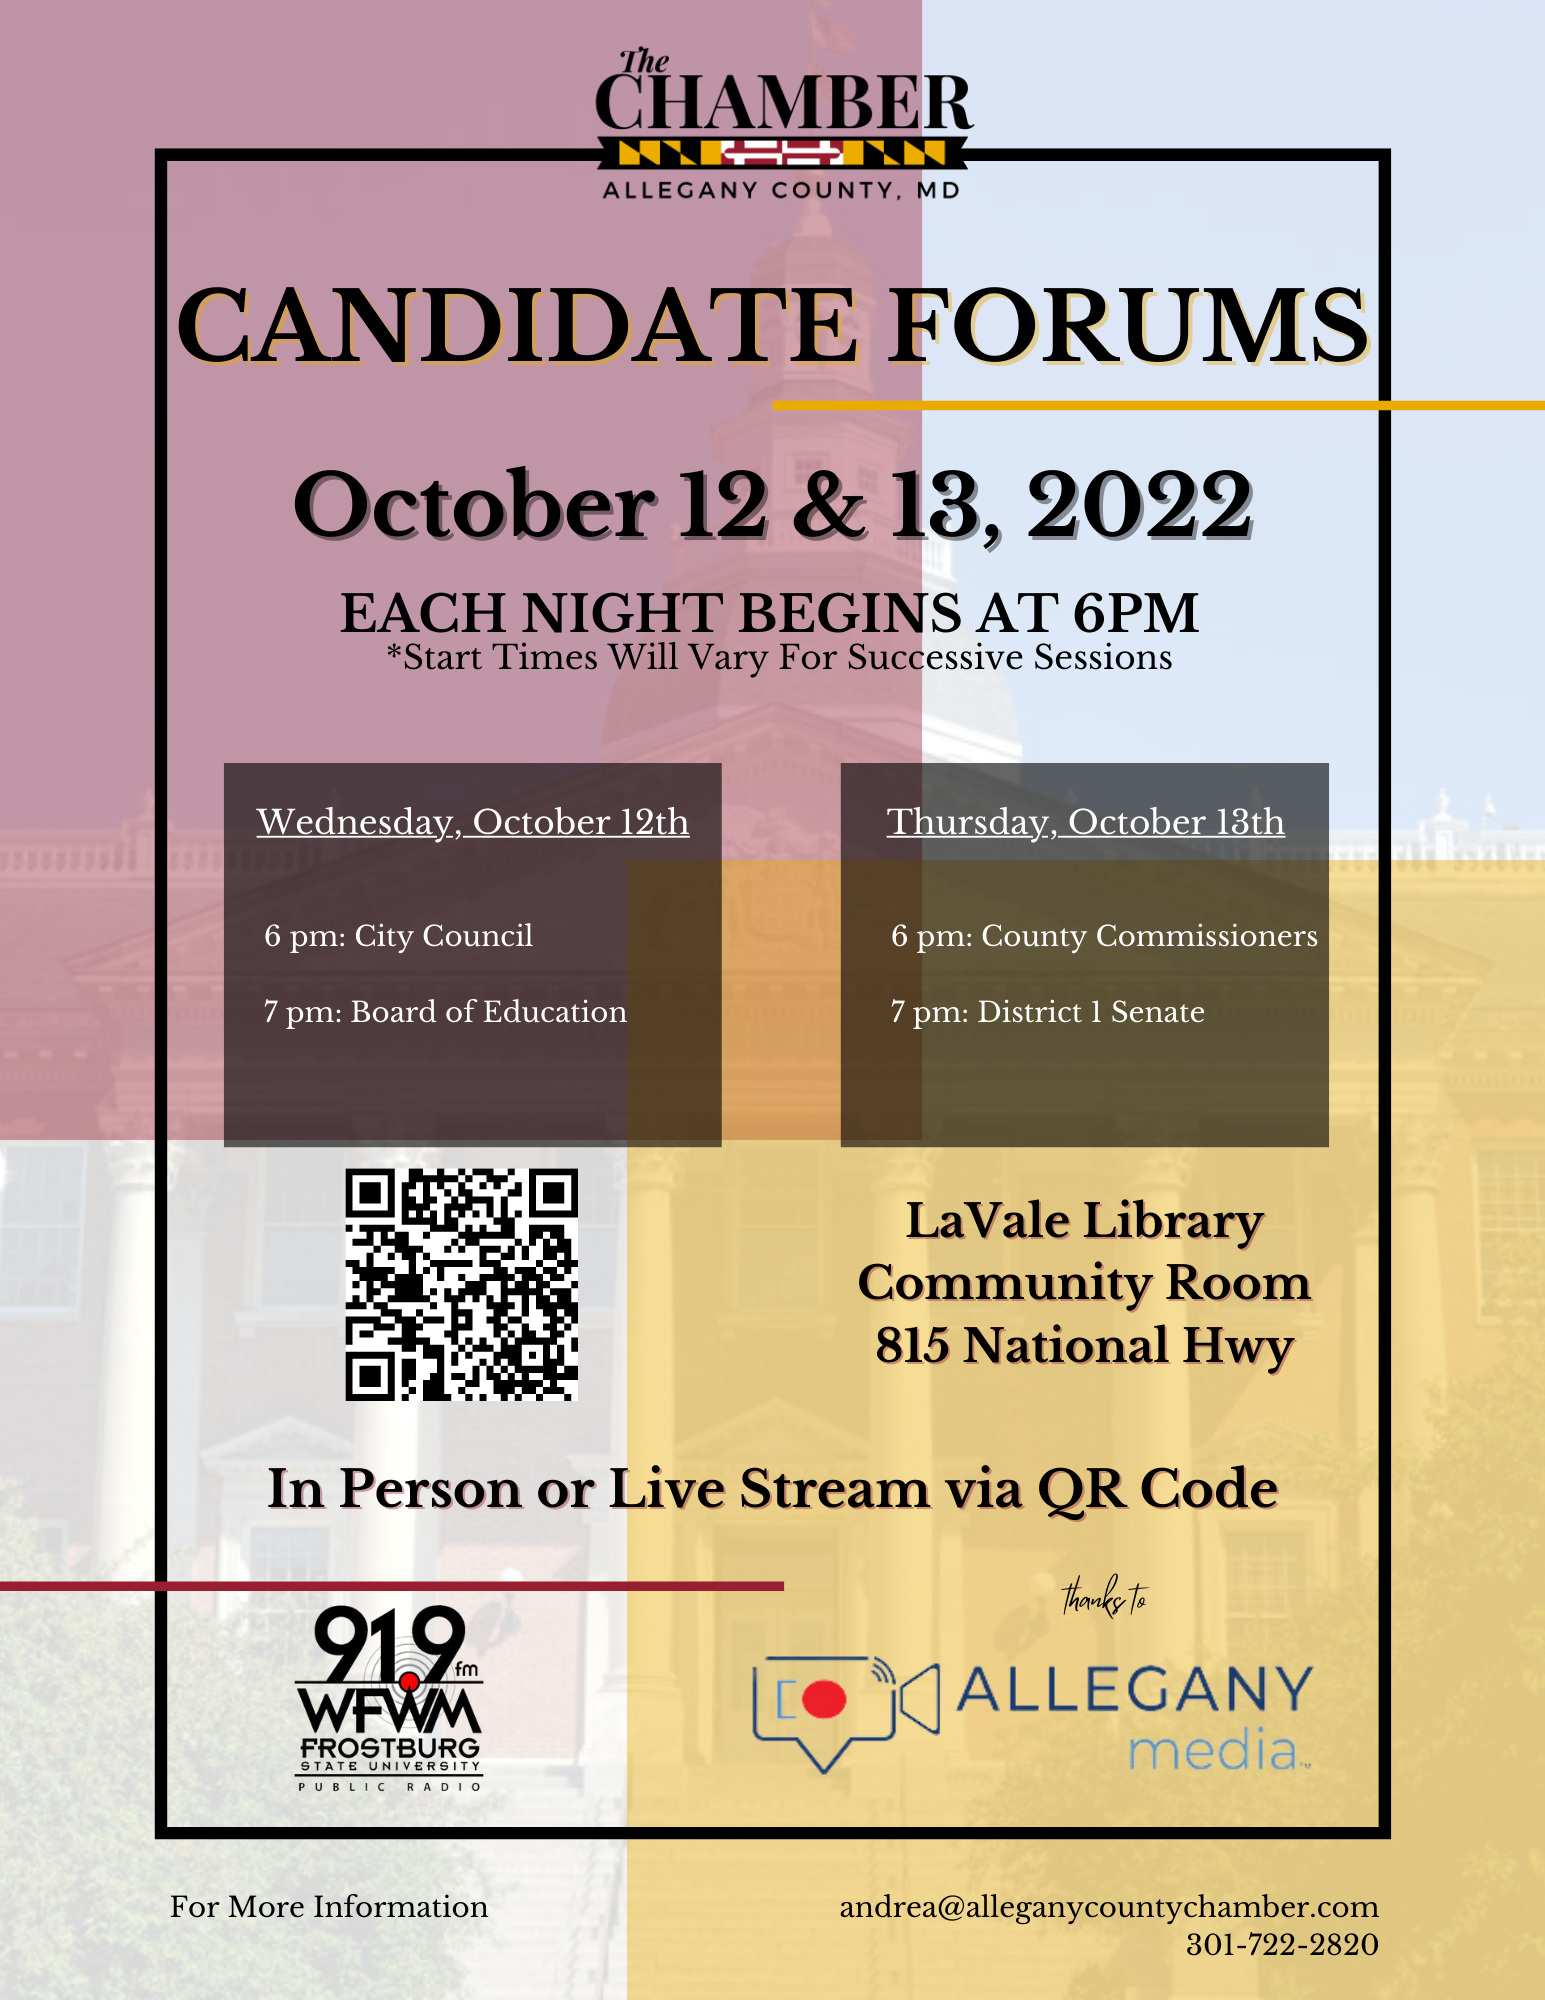 Chamber of Commerce Candidate Forum Flyer